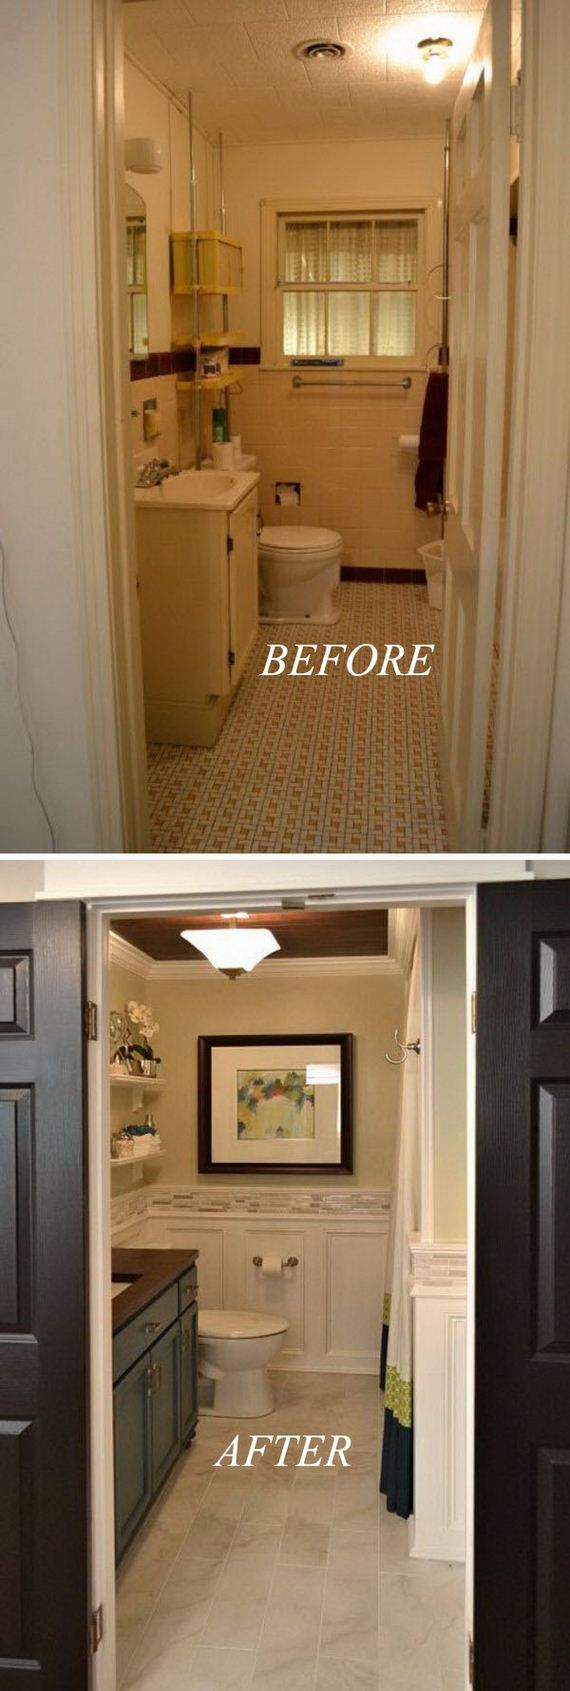 28-awesome-bathroom-makeovers